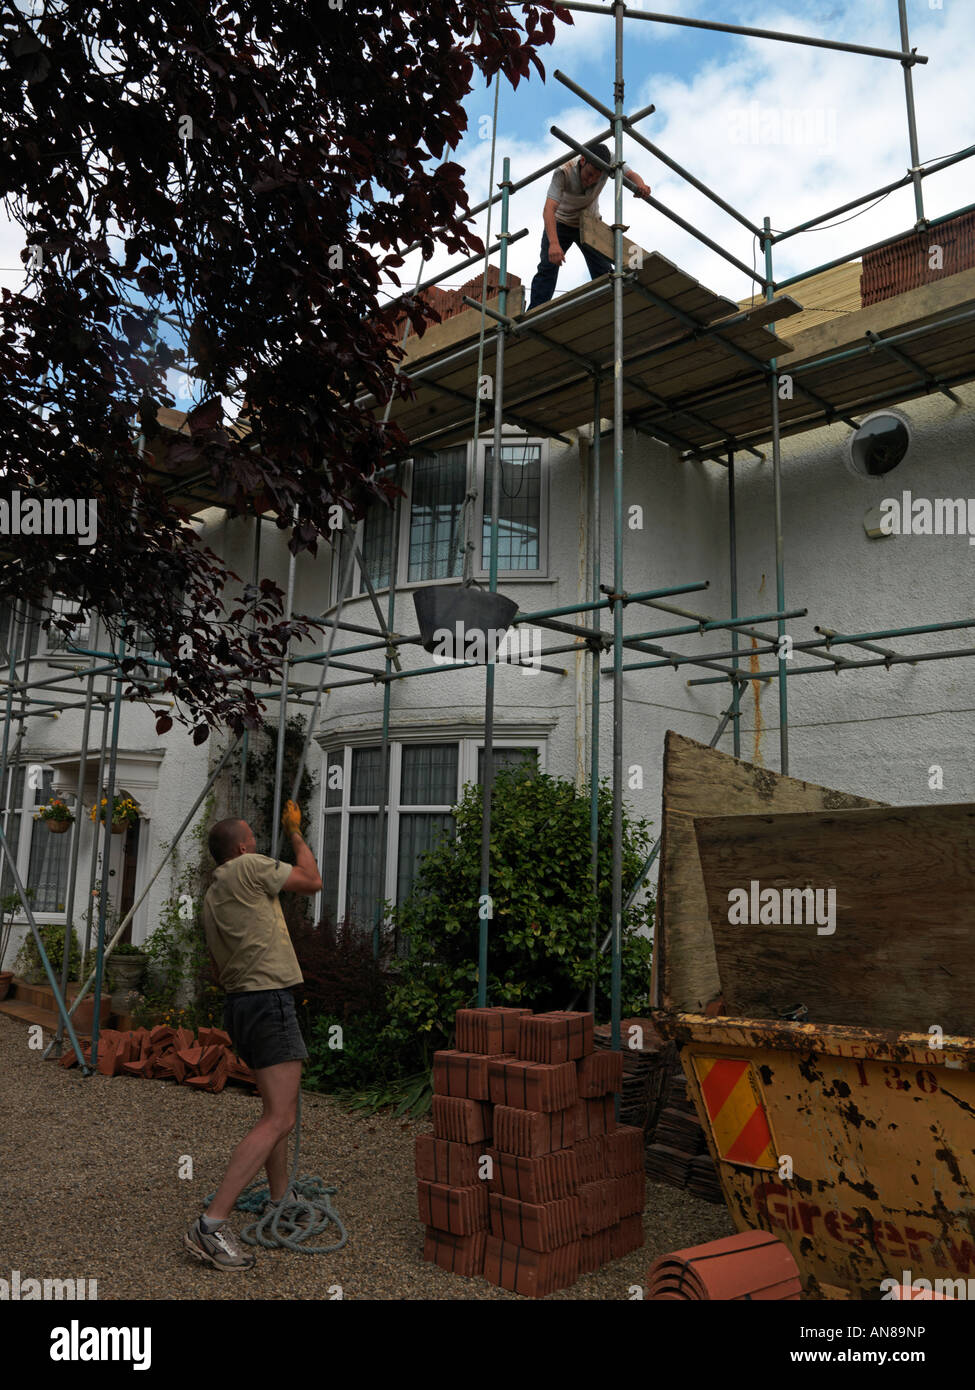 Builders using a Hoist to lift tiles to the roof Stock Photo